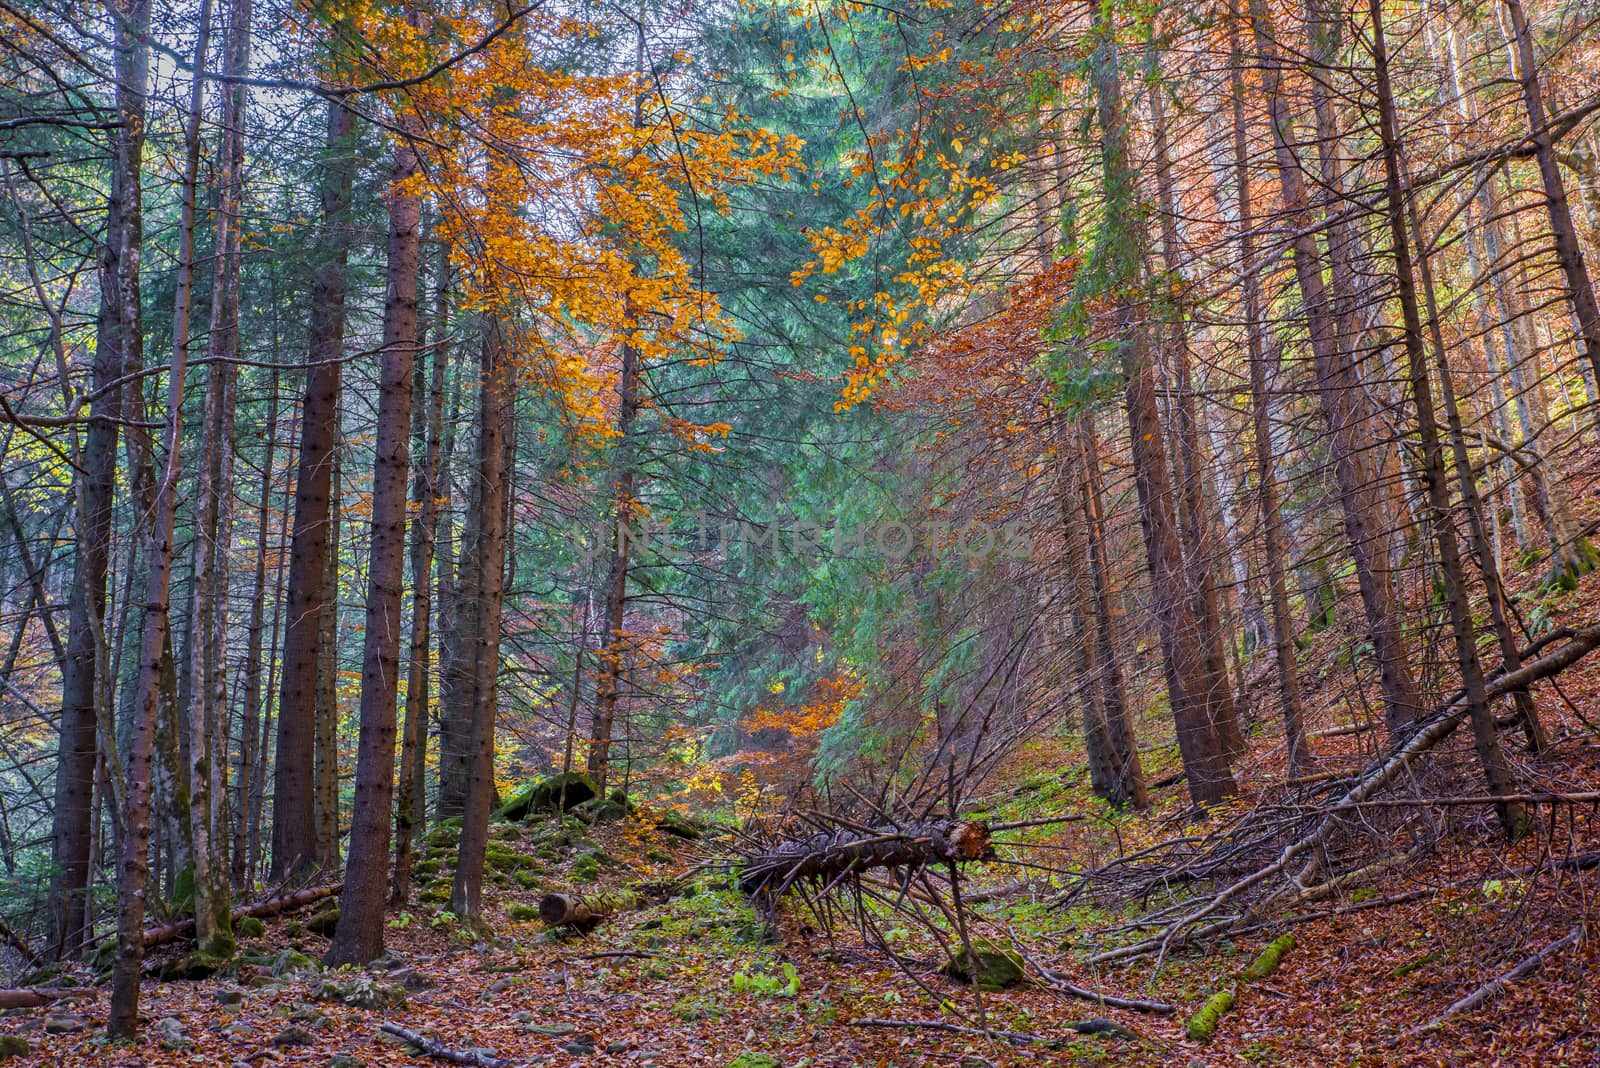 Autumn forest fallen branches and trees by savcoco